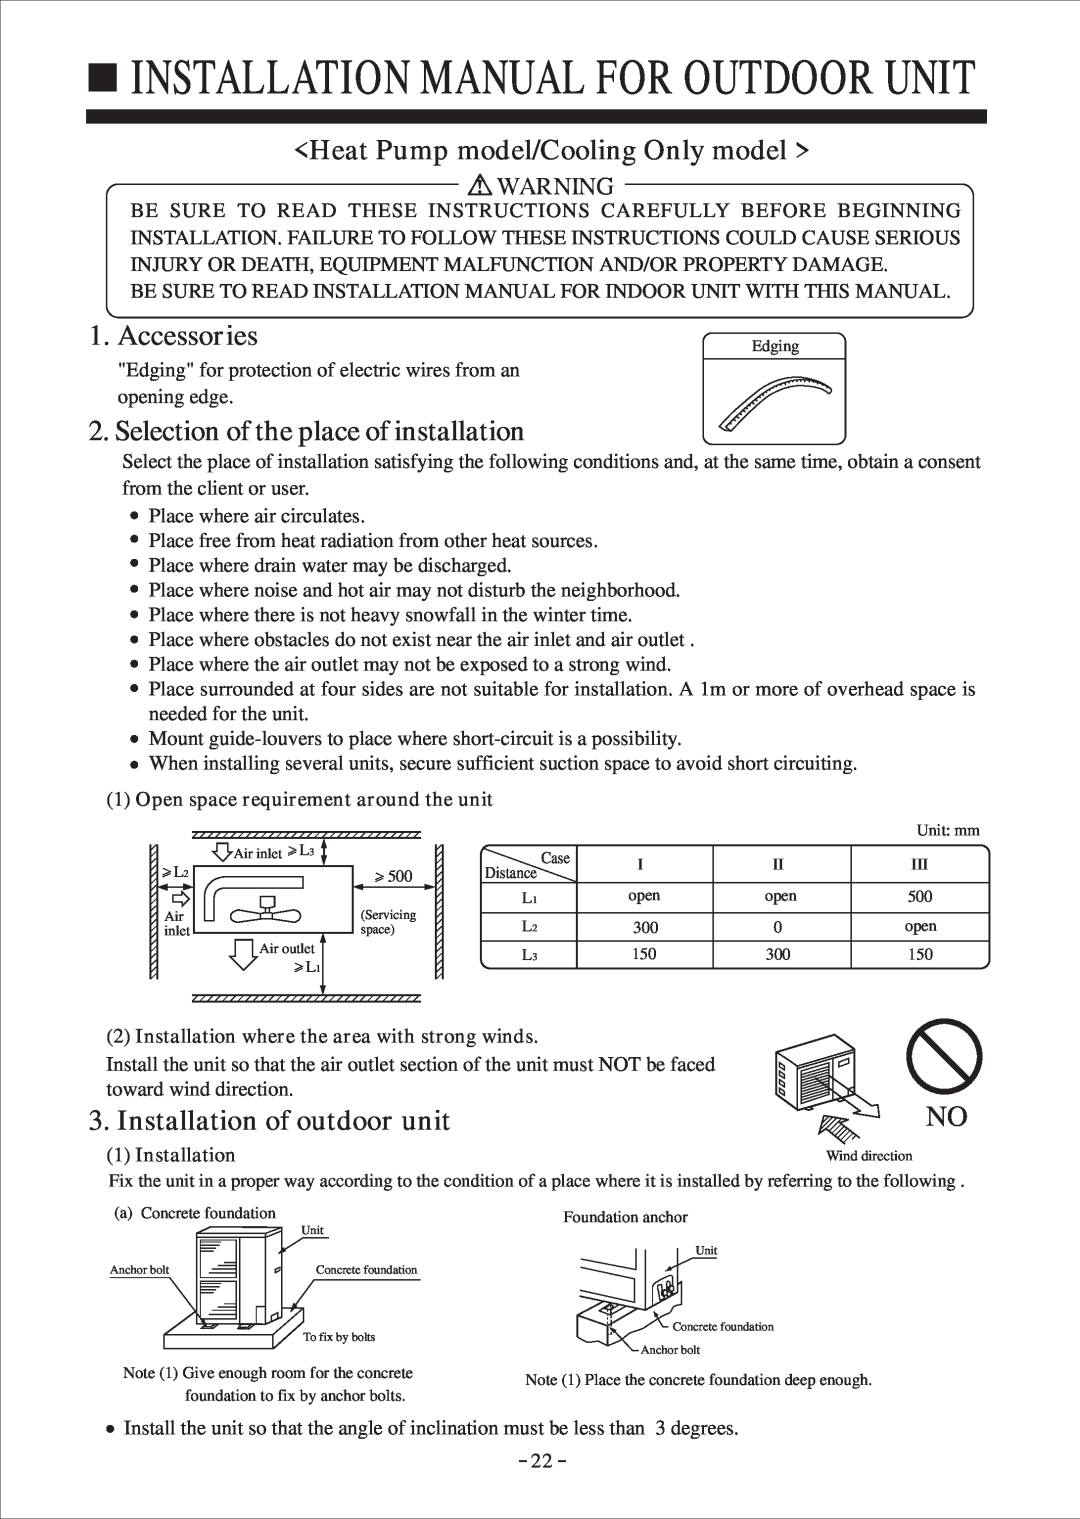 Haier HDU-28H03/H, HDU-24H03/H Installation Manual For Outdoor Unit, <Heat Pump model/Cooling Only model >, Accessories 